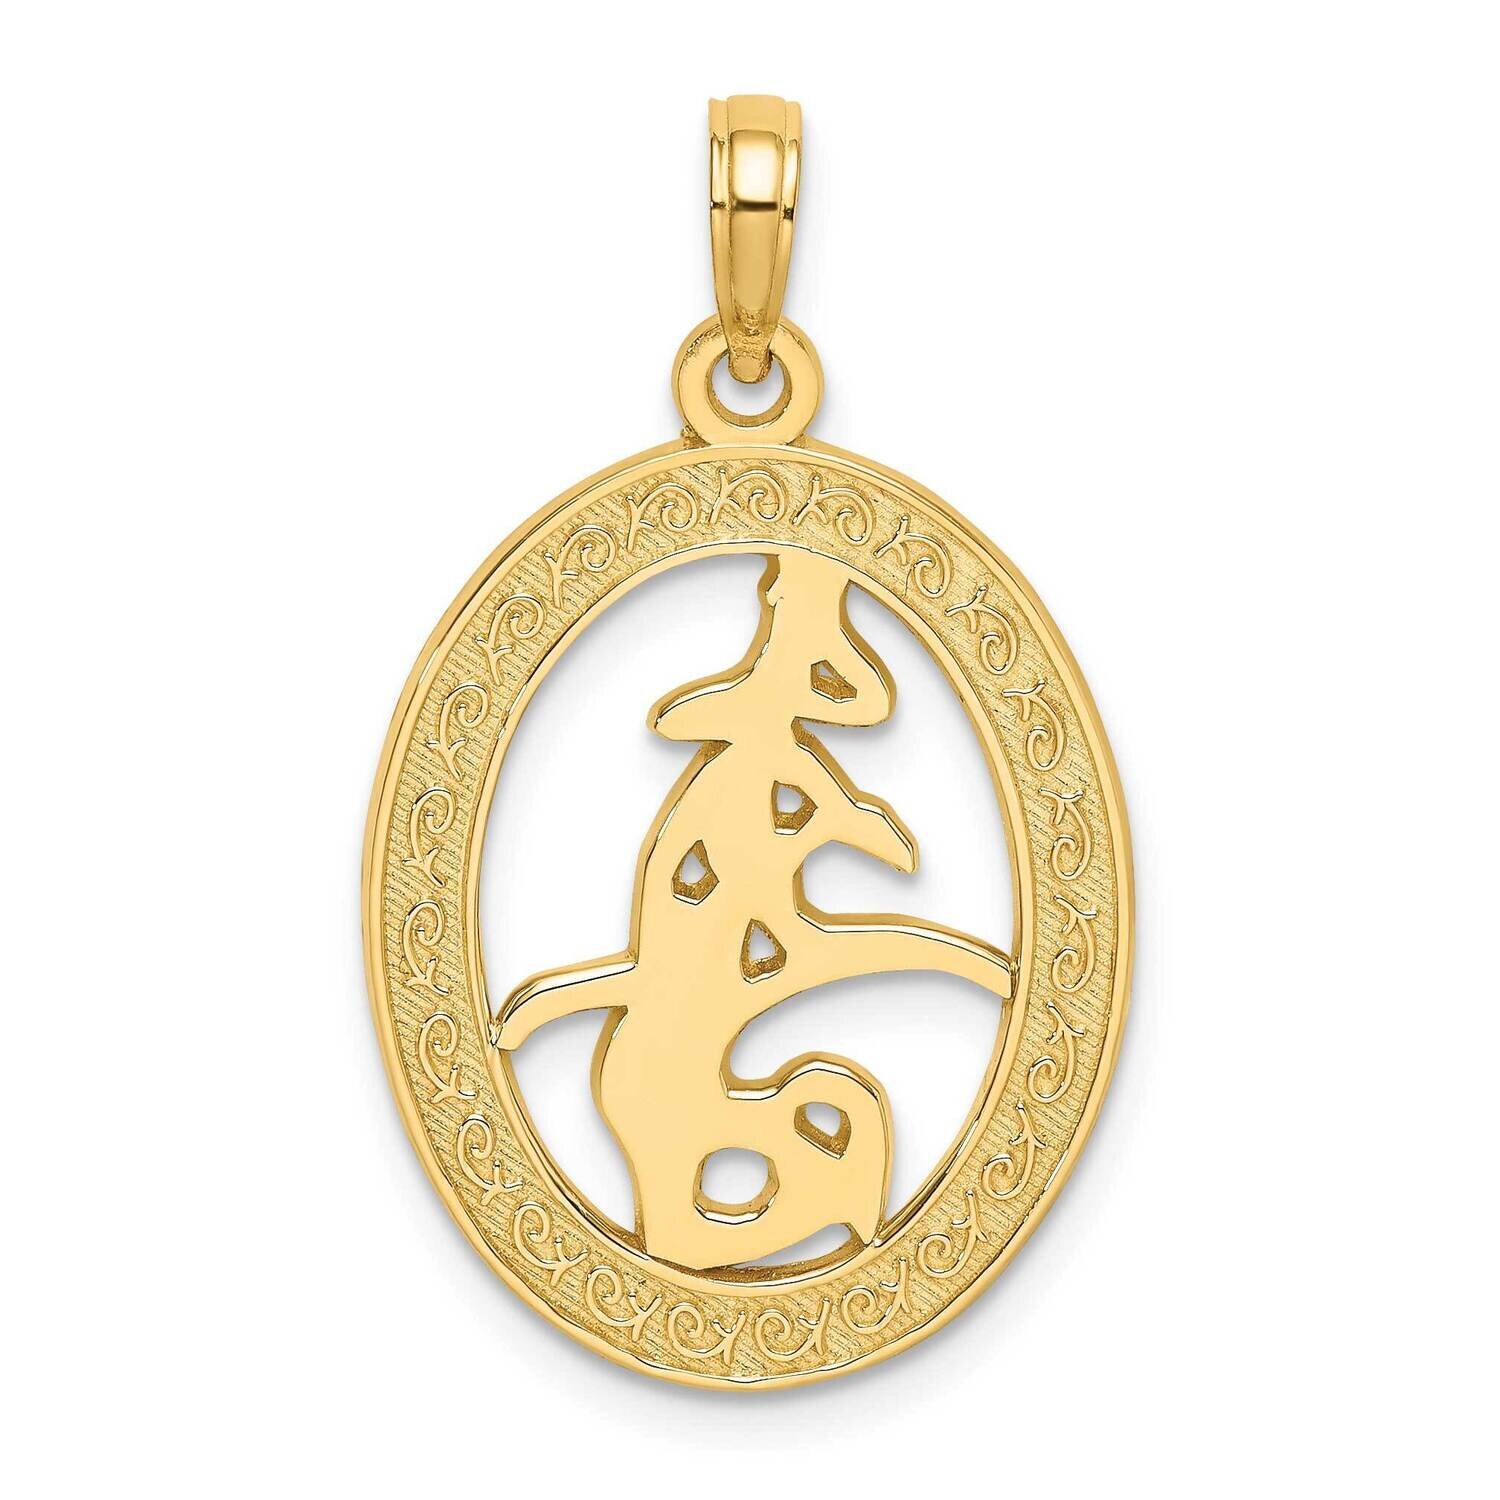 Chinese Love Symbol In Engraved Oval Frame Charm 14k Gold K7305